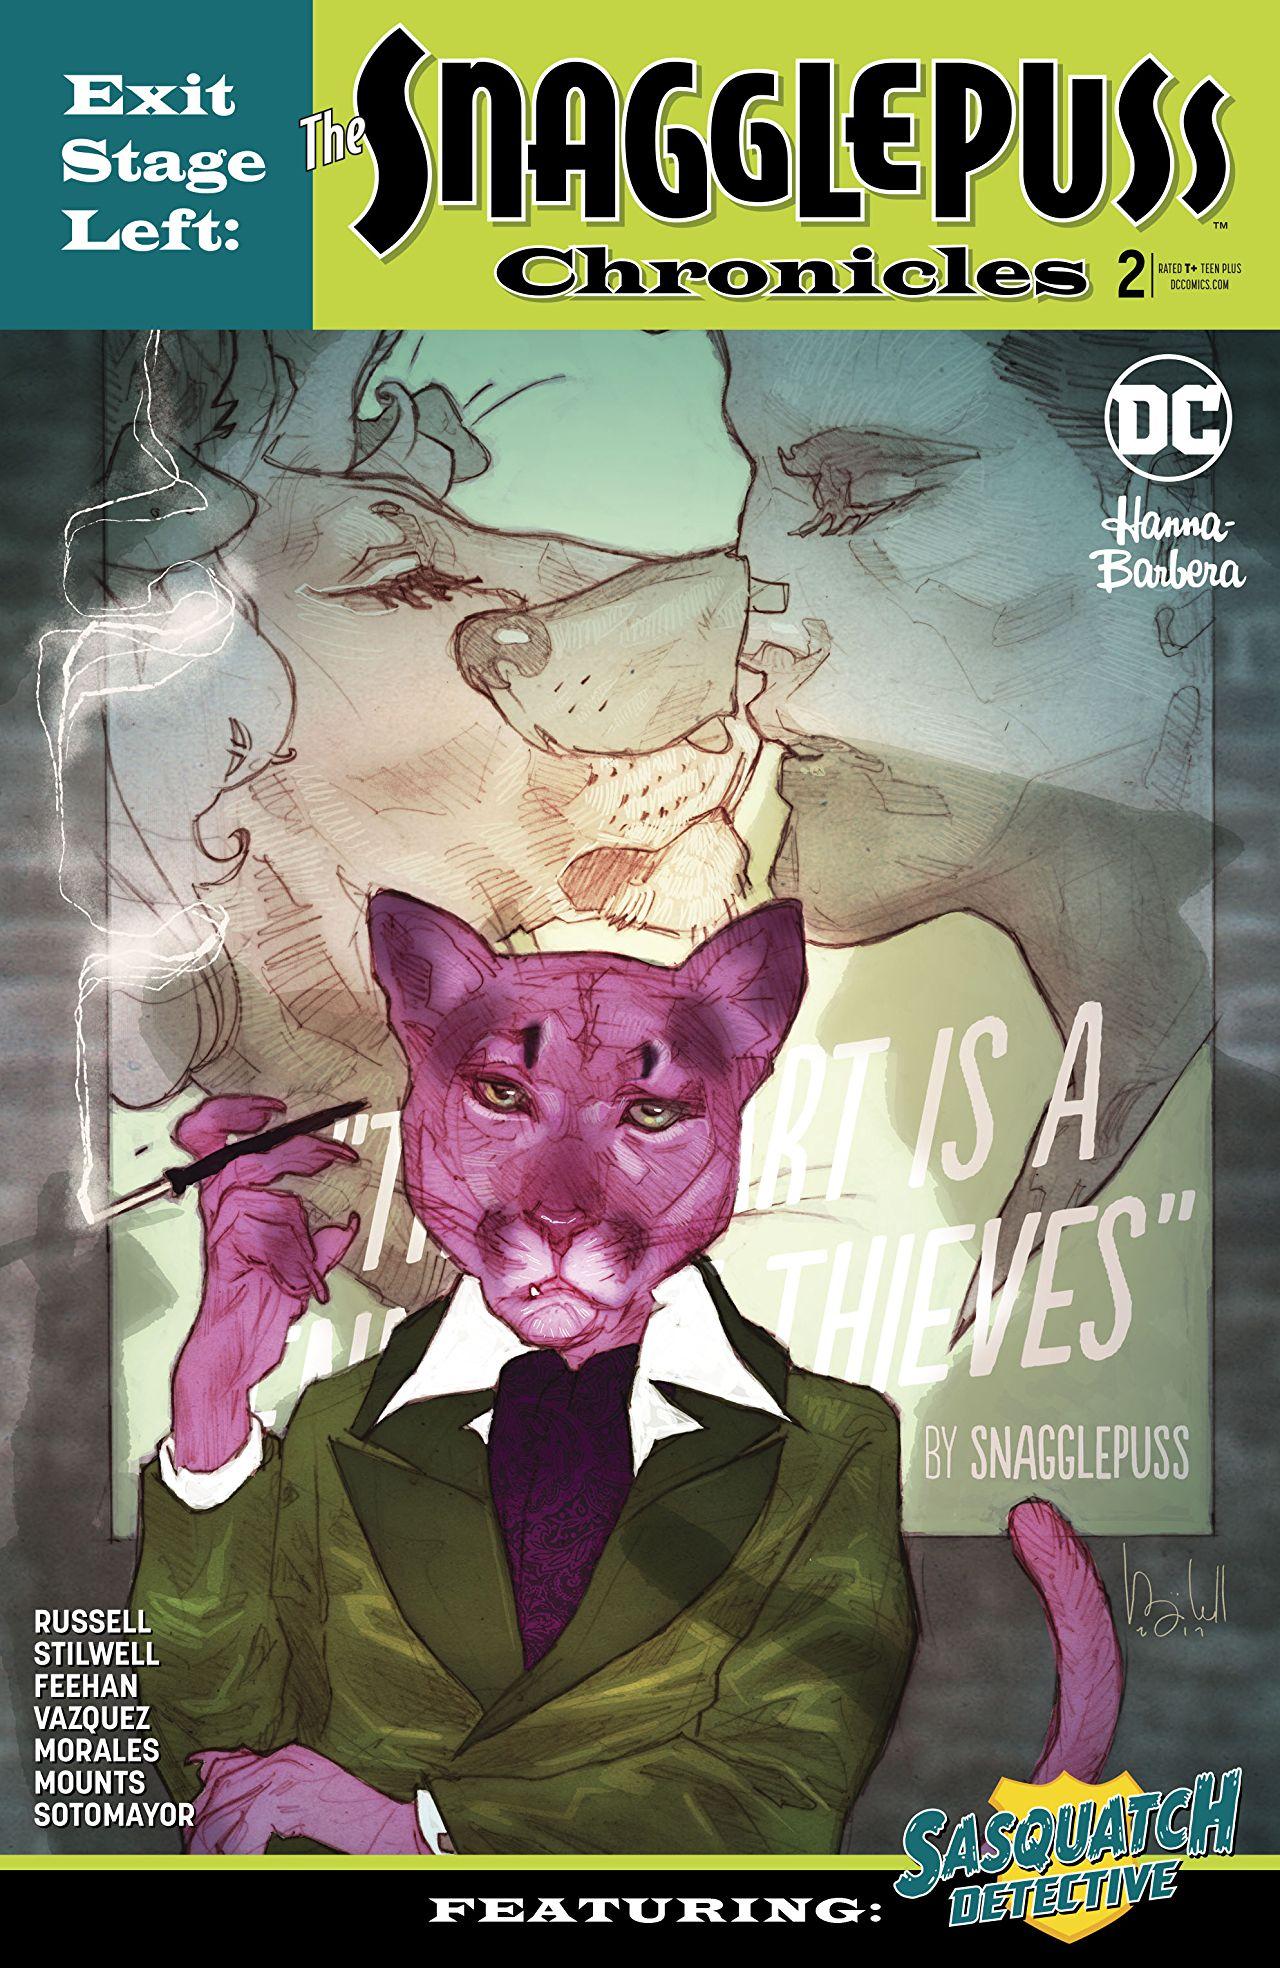 Exit Stage Left: The Snagglepuss Chronicles Vol. 1 #2